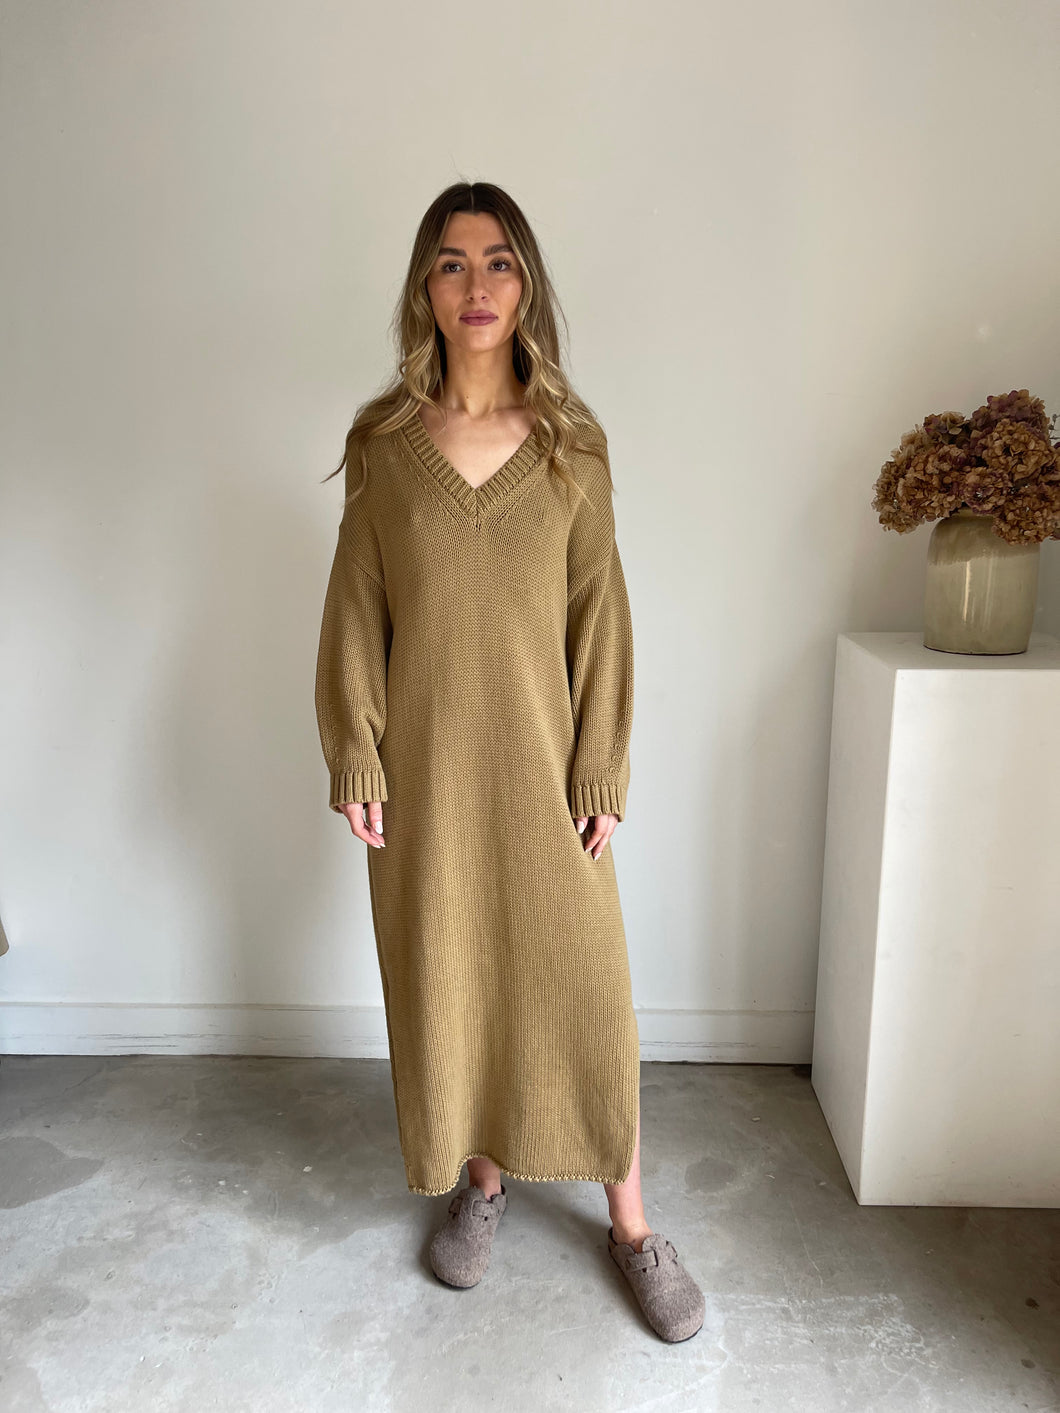 The Simple Folk Knitted Dress